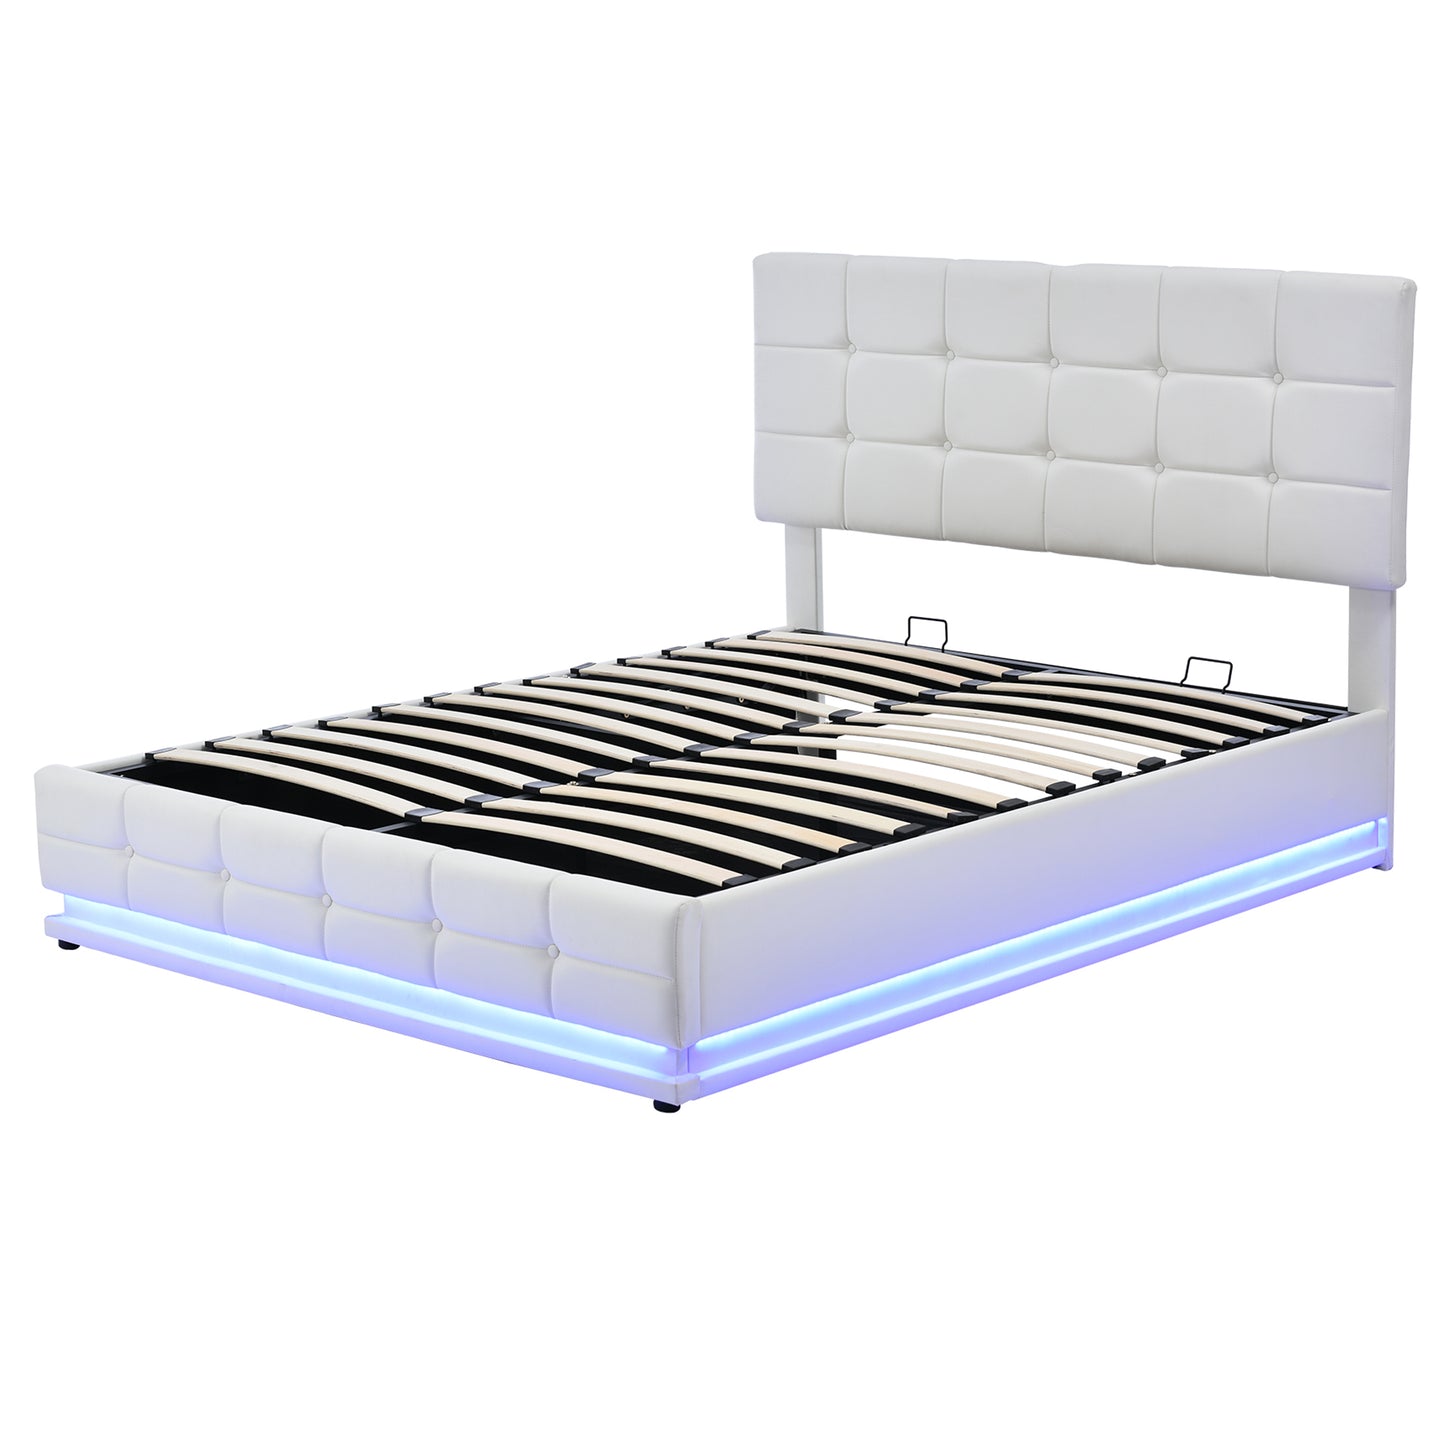 Mabin Modern Hydraulic Lift Platform Bed with LED Lights - White